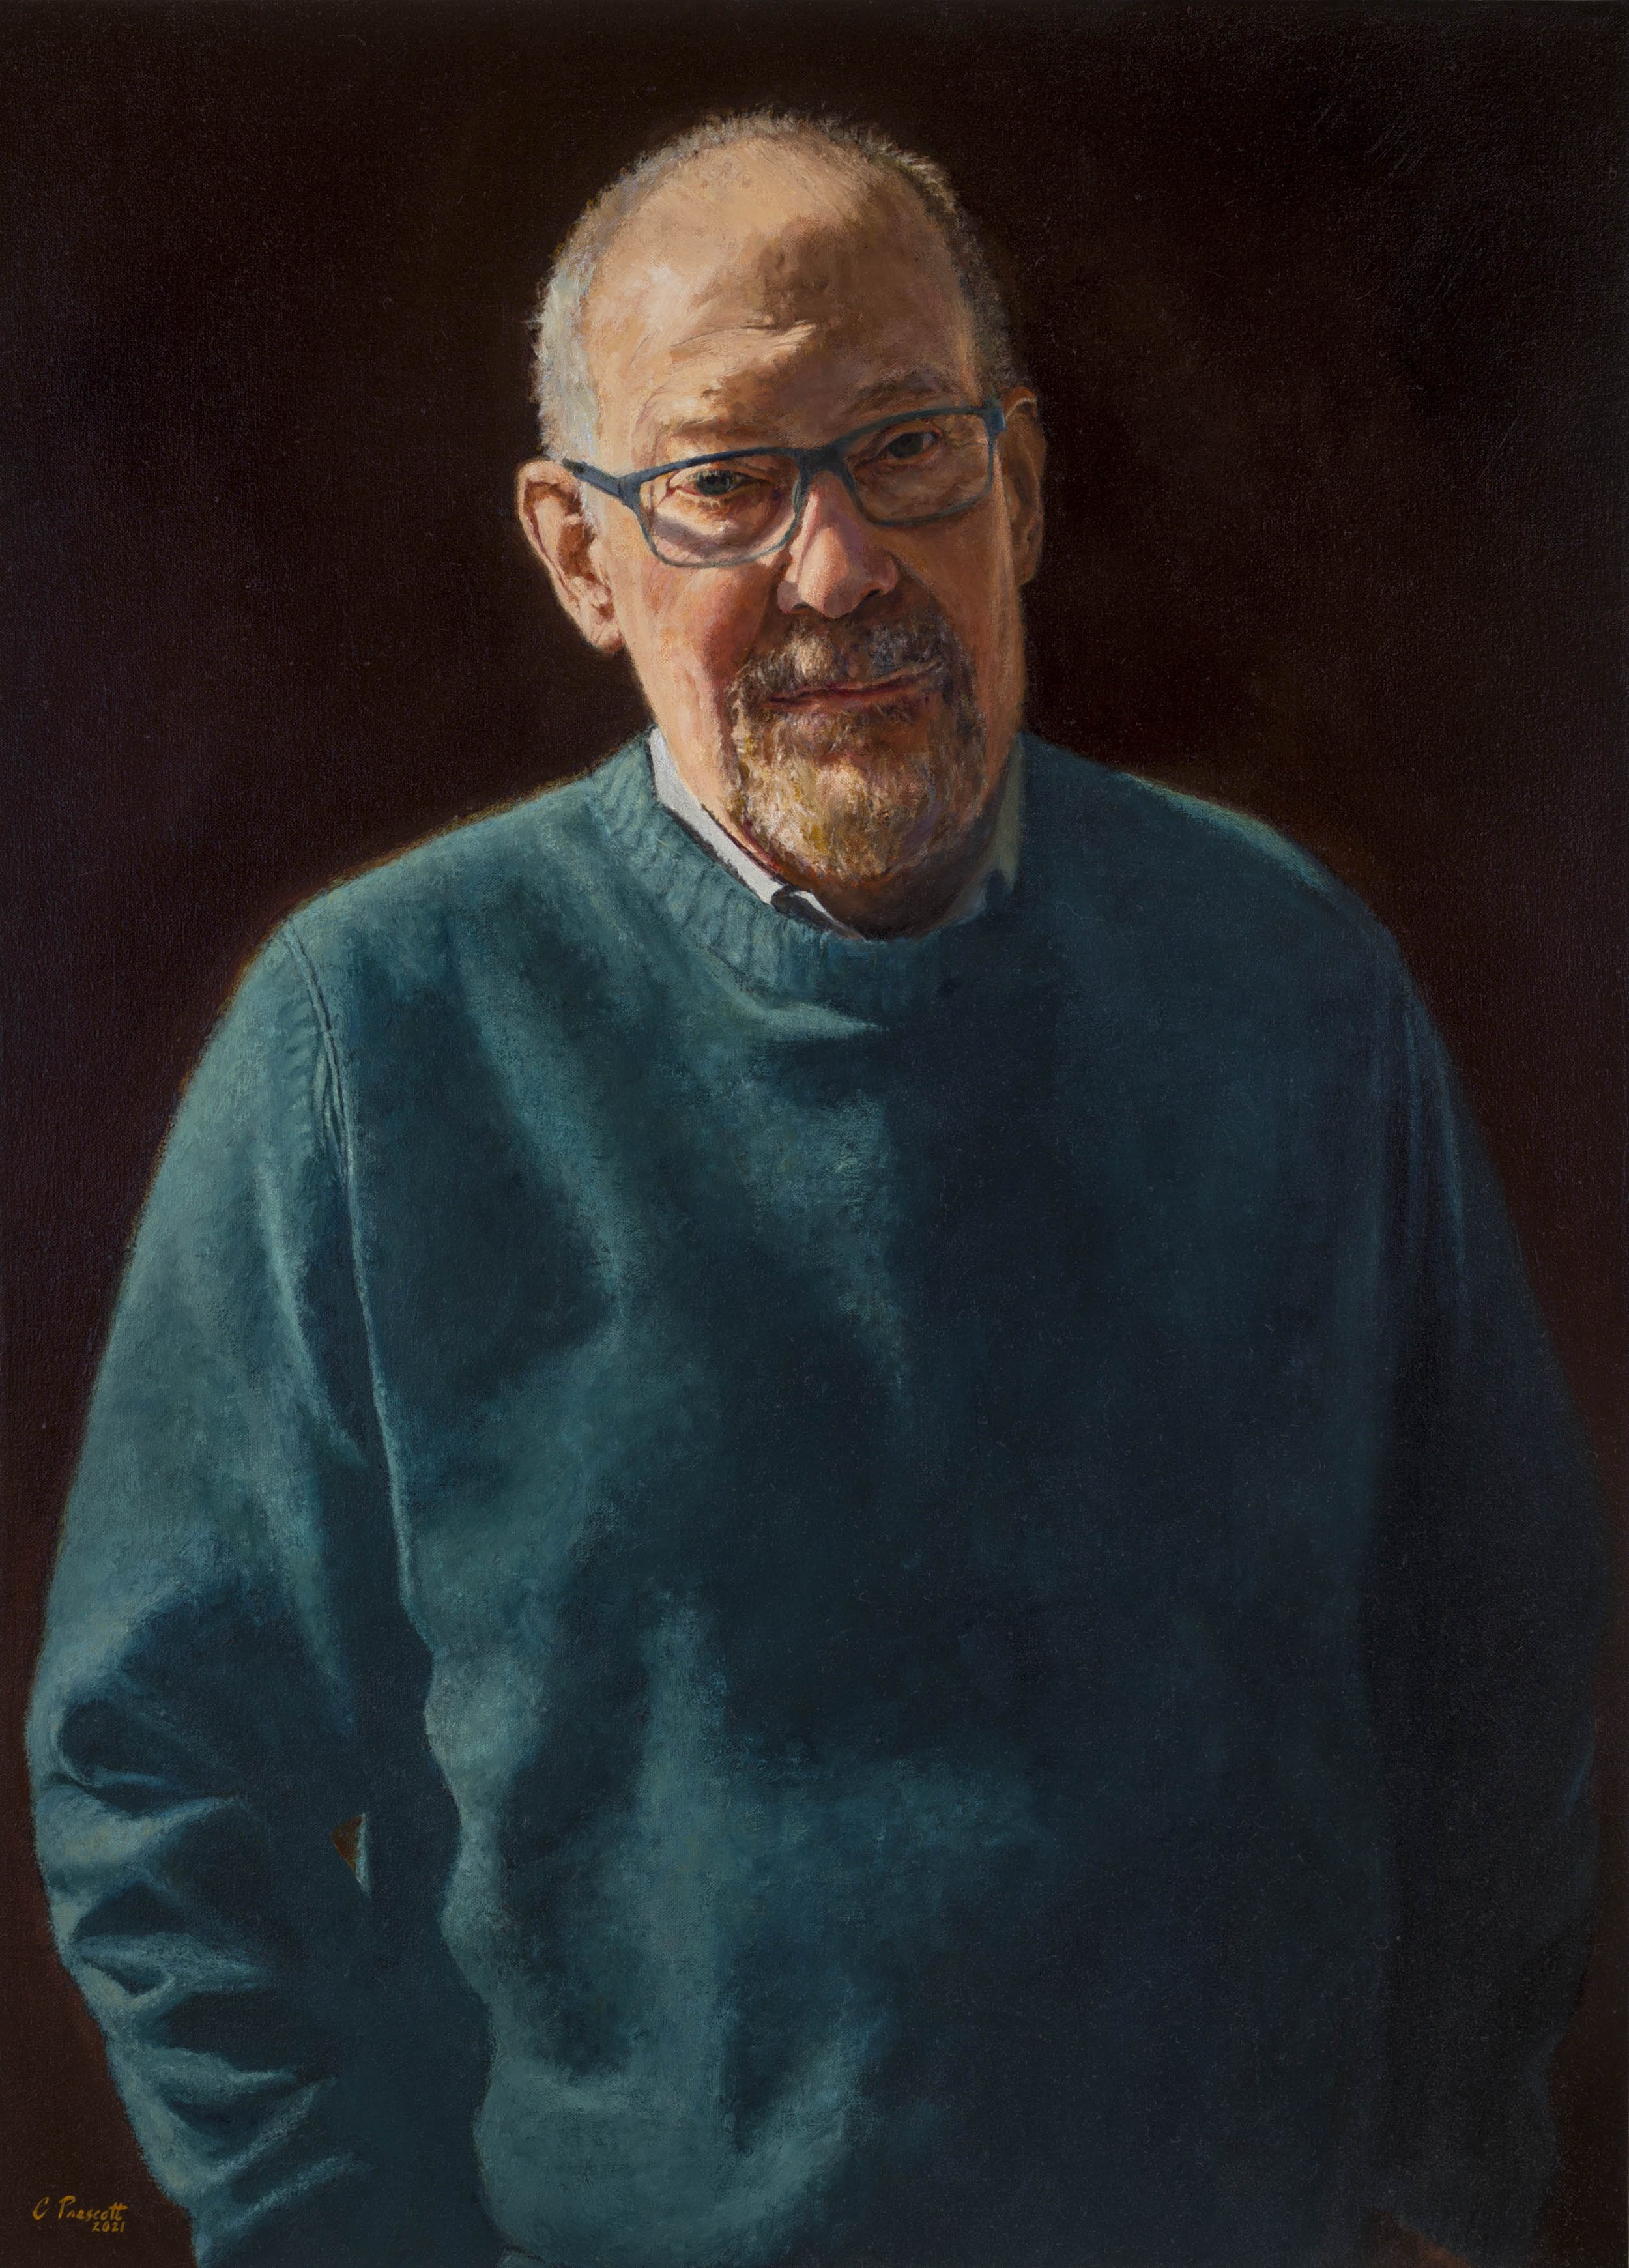   Blue Sweater,  Oil on Canvas, 2021, 36 x 26” 